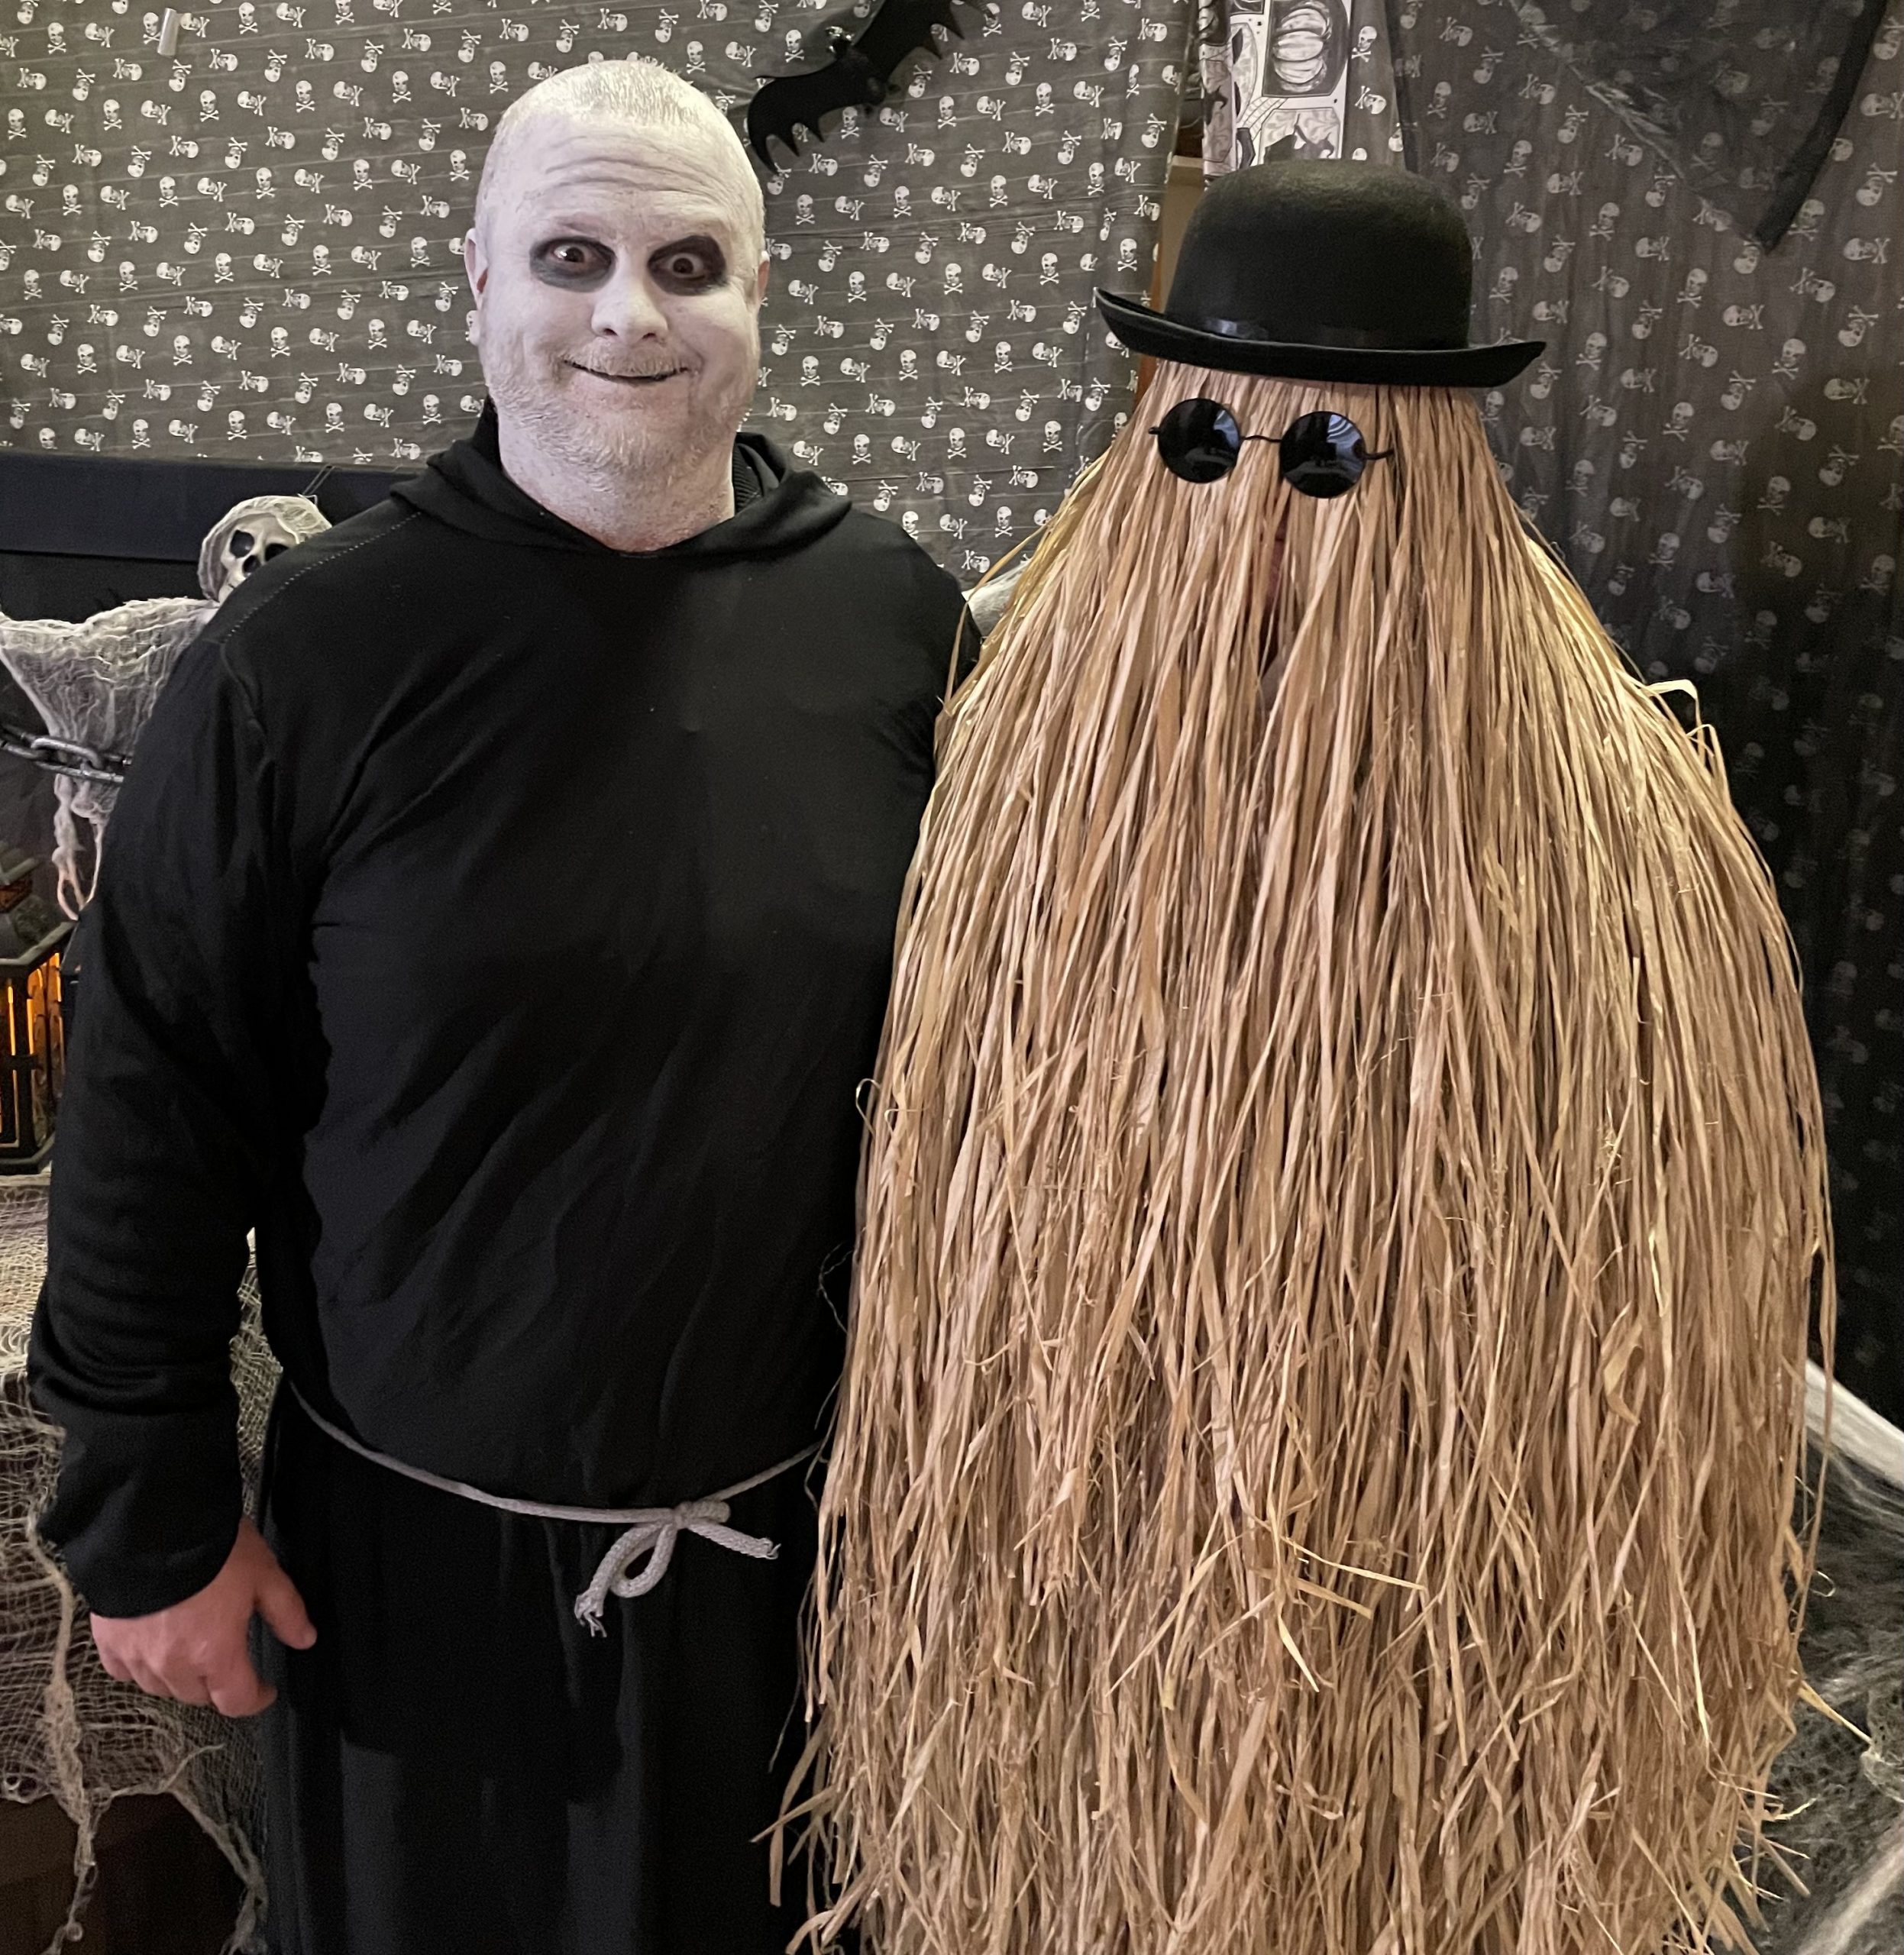 Easiest Cousin Itt and Uncle Fester Couple Costume with the Most Wins!